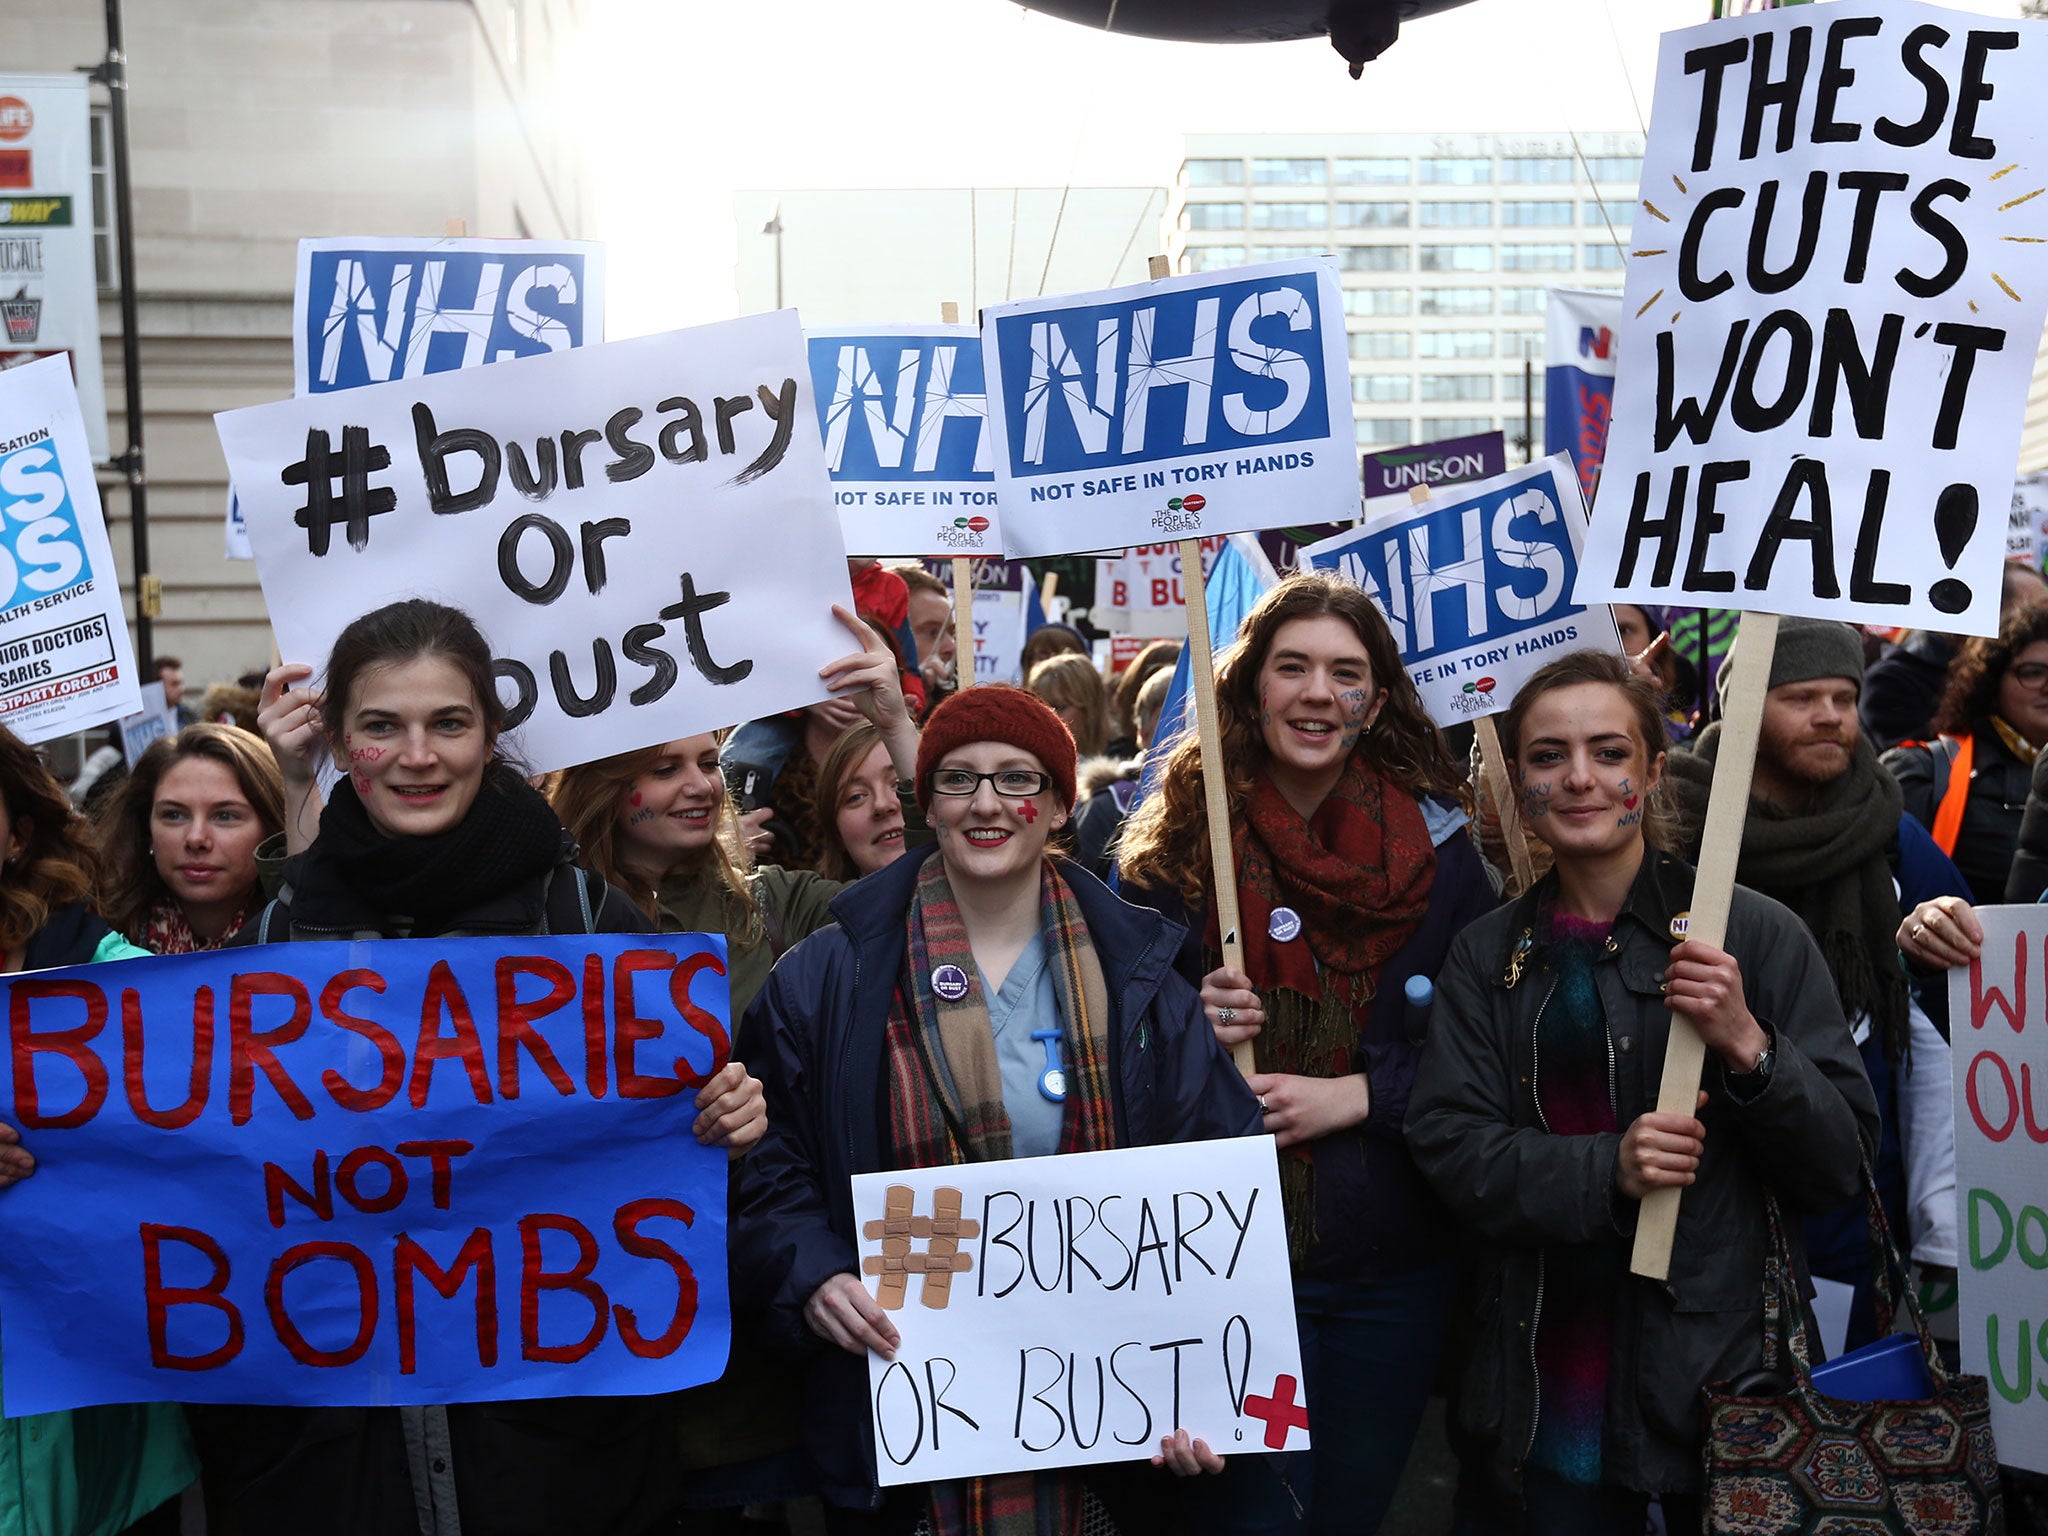 Nurses and midwives took the streets to protest the ending of training bursaries